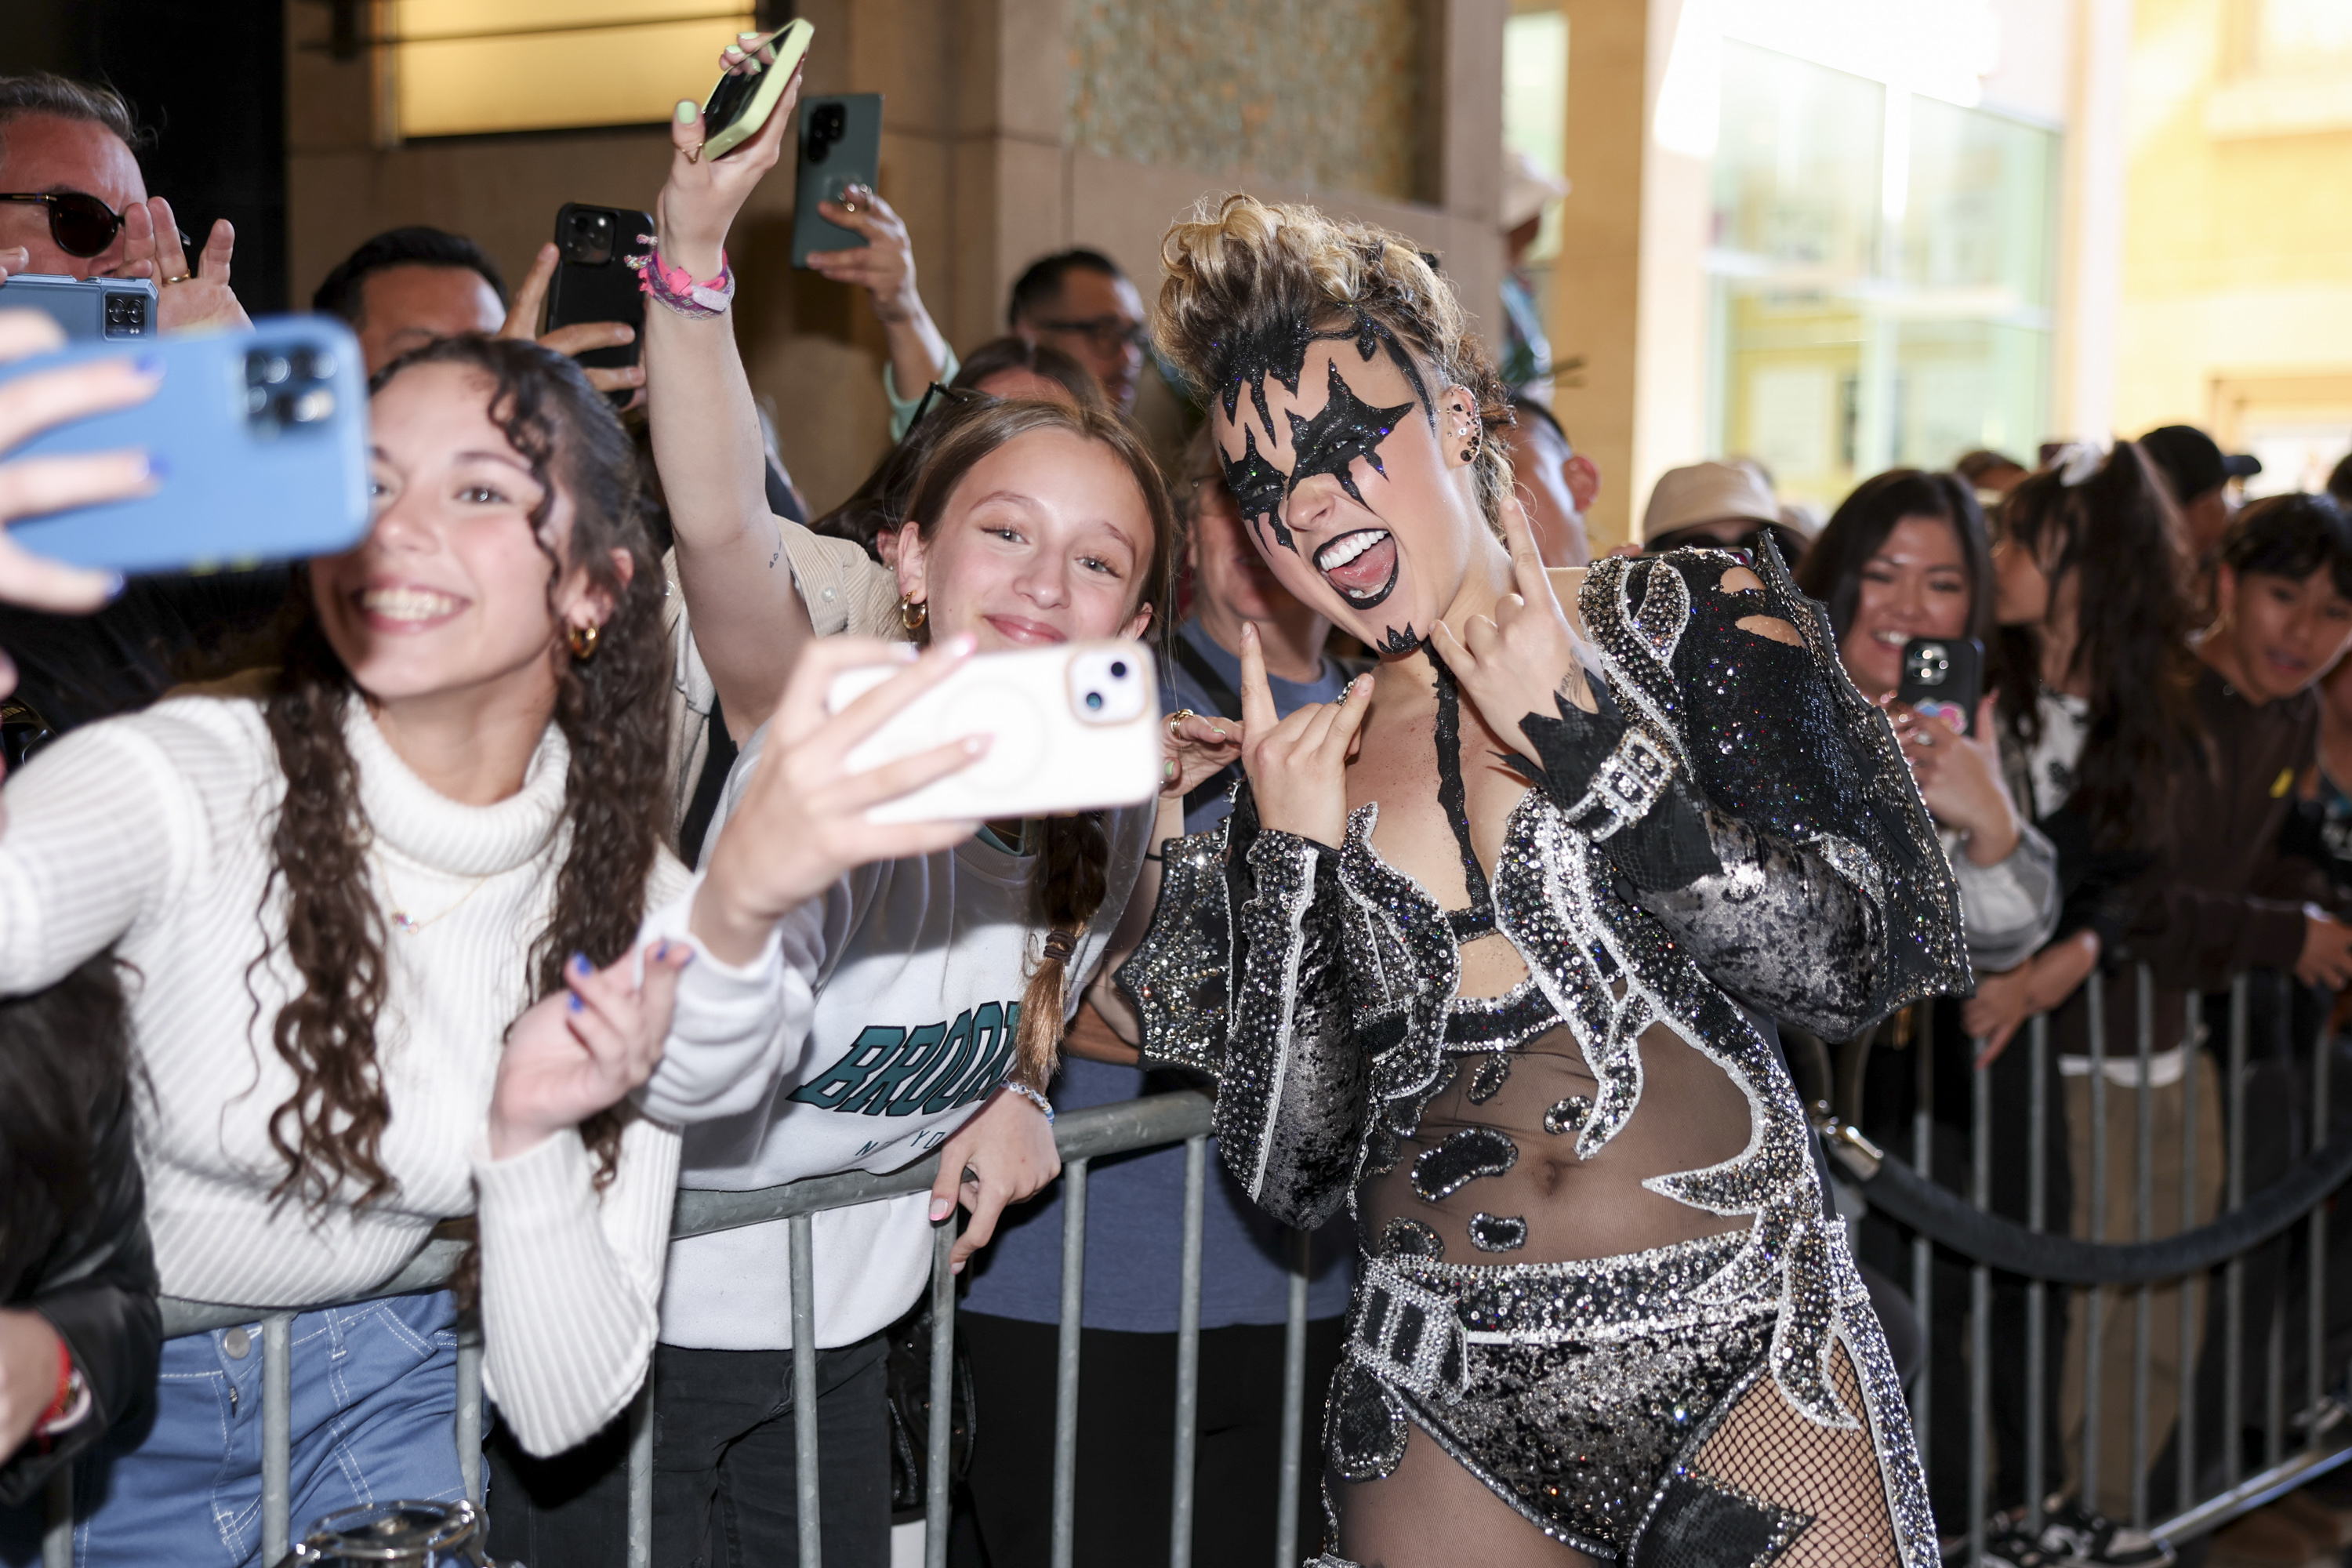 Fans take selfies with a celebrity wearing a sparkling bodysuit with bold cutouts at an event